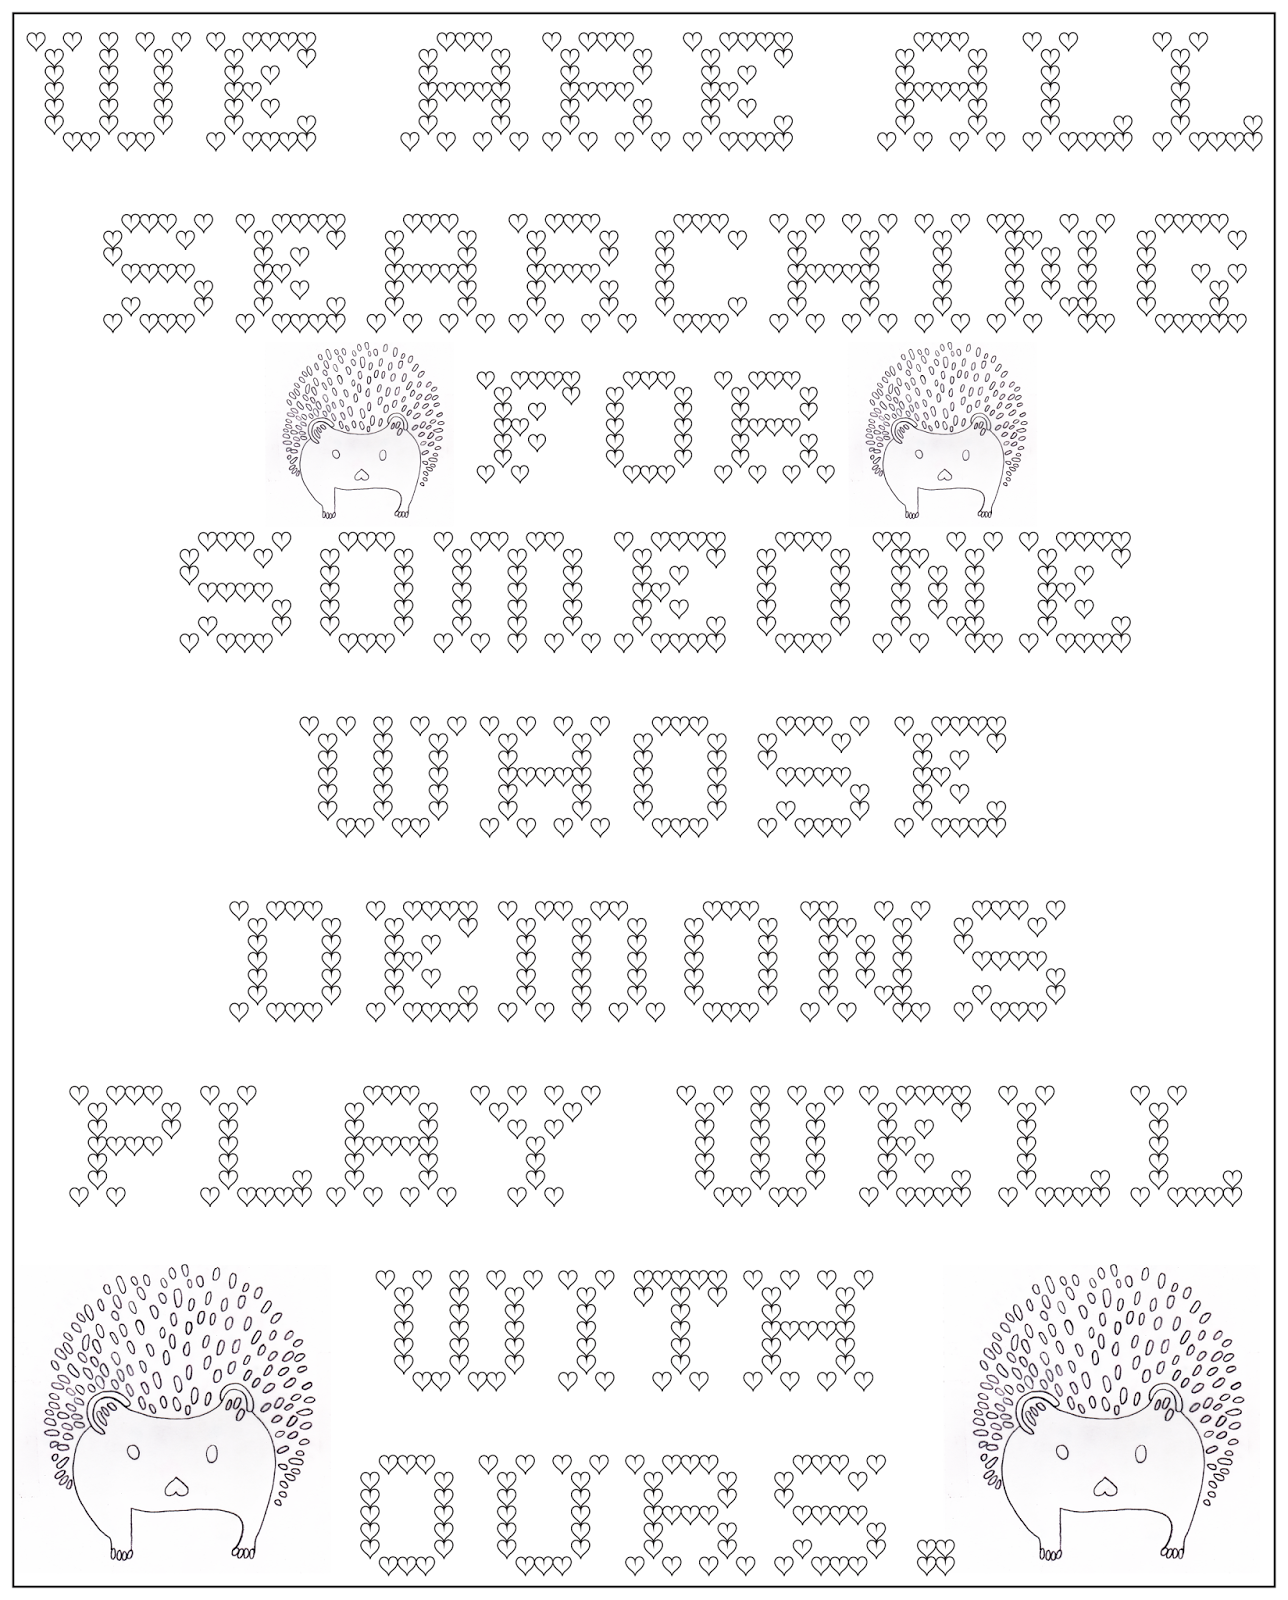 Adult coloring page searchin gfor demons, stefanie girard